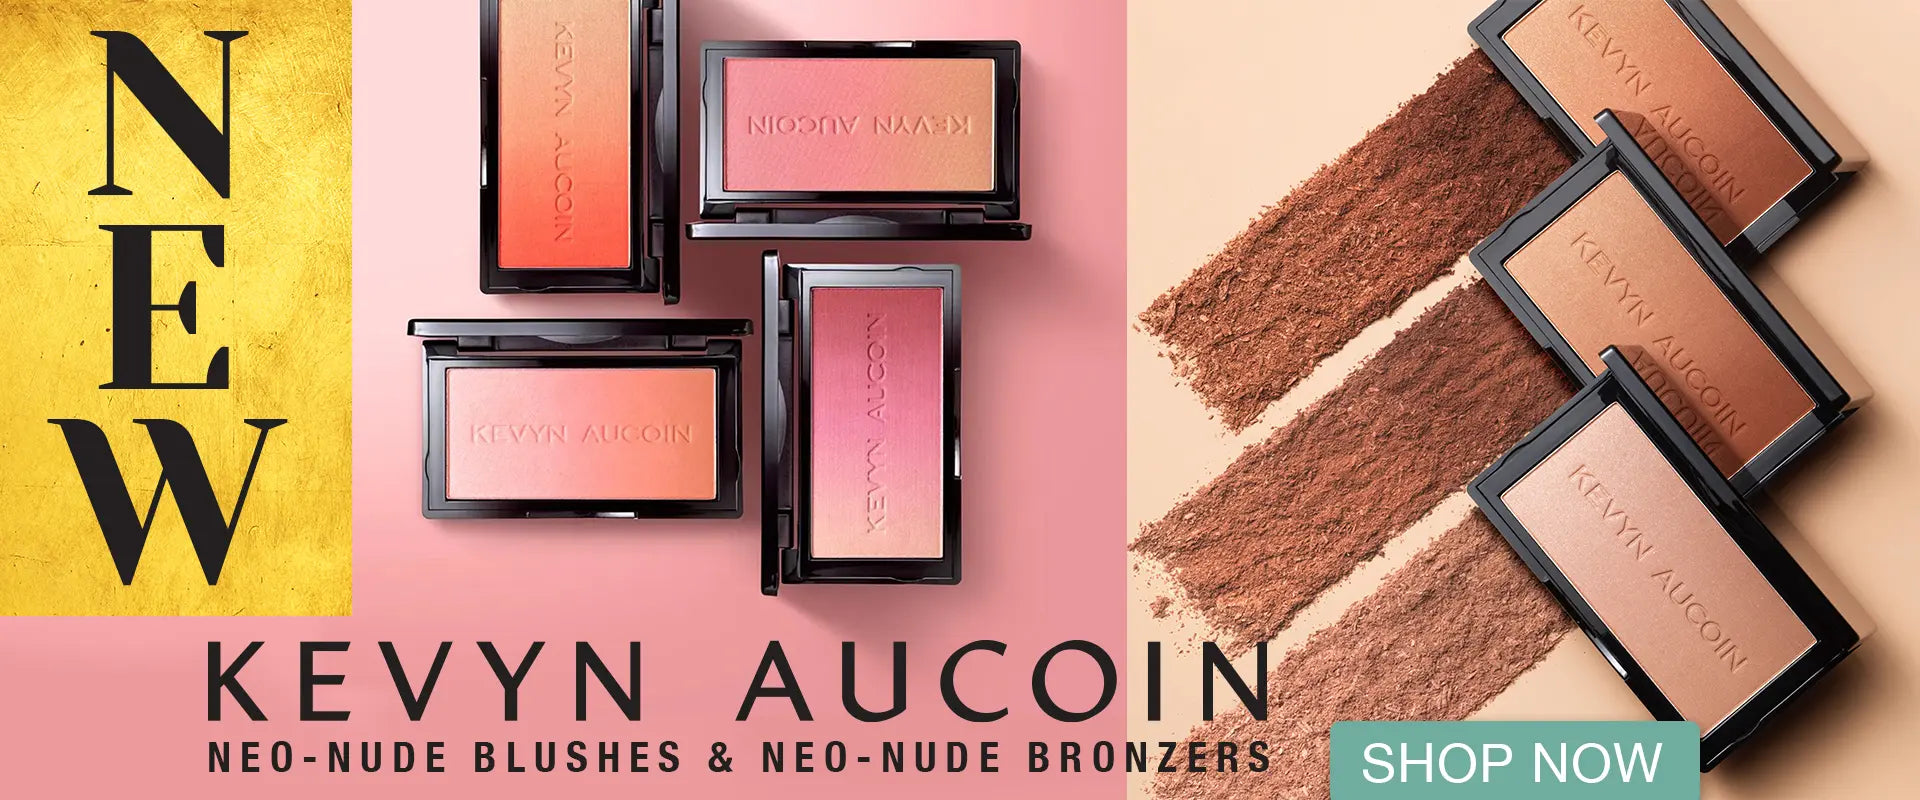 Kevyn Aucoin "Sensual Skin Enhancers" is now available at themakeupaltar.com